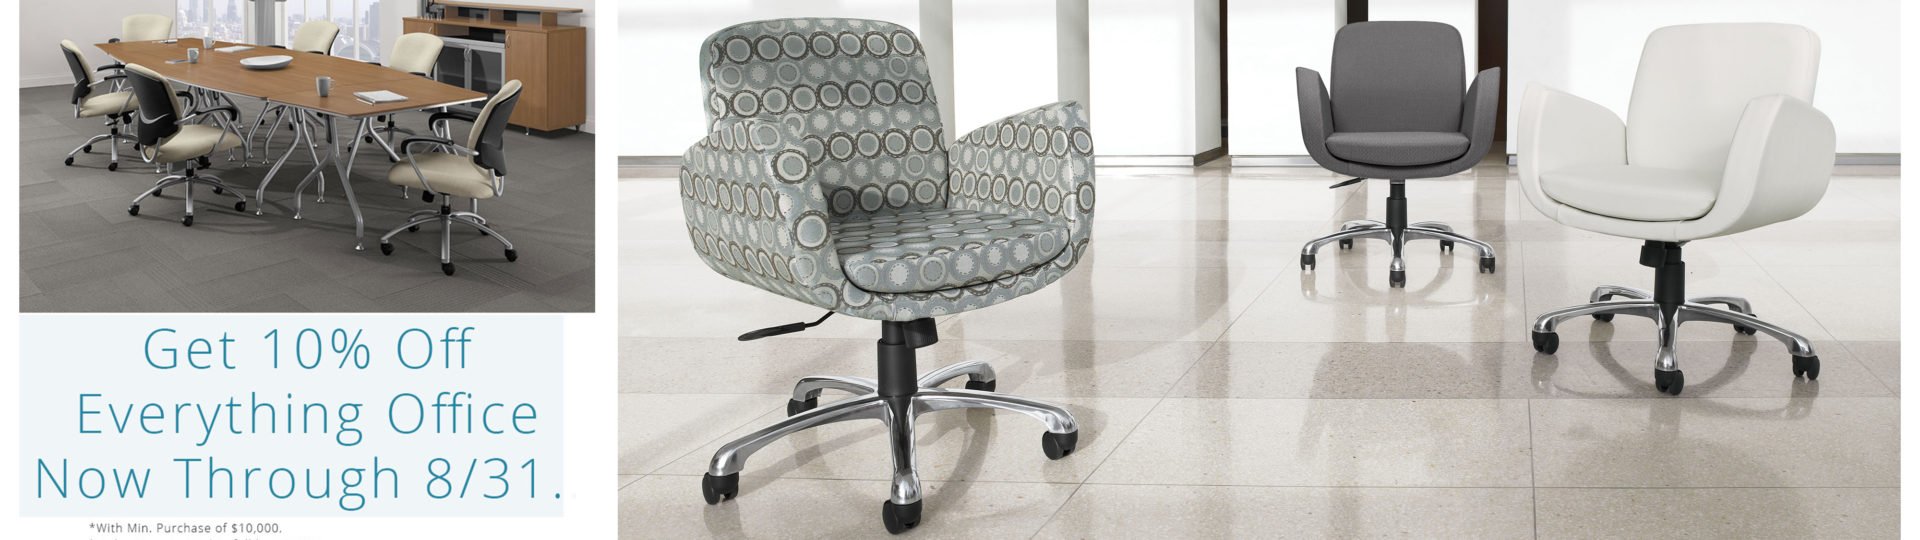 Office Furniture 10% Off